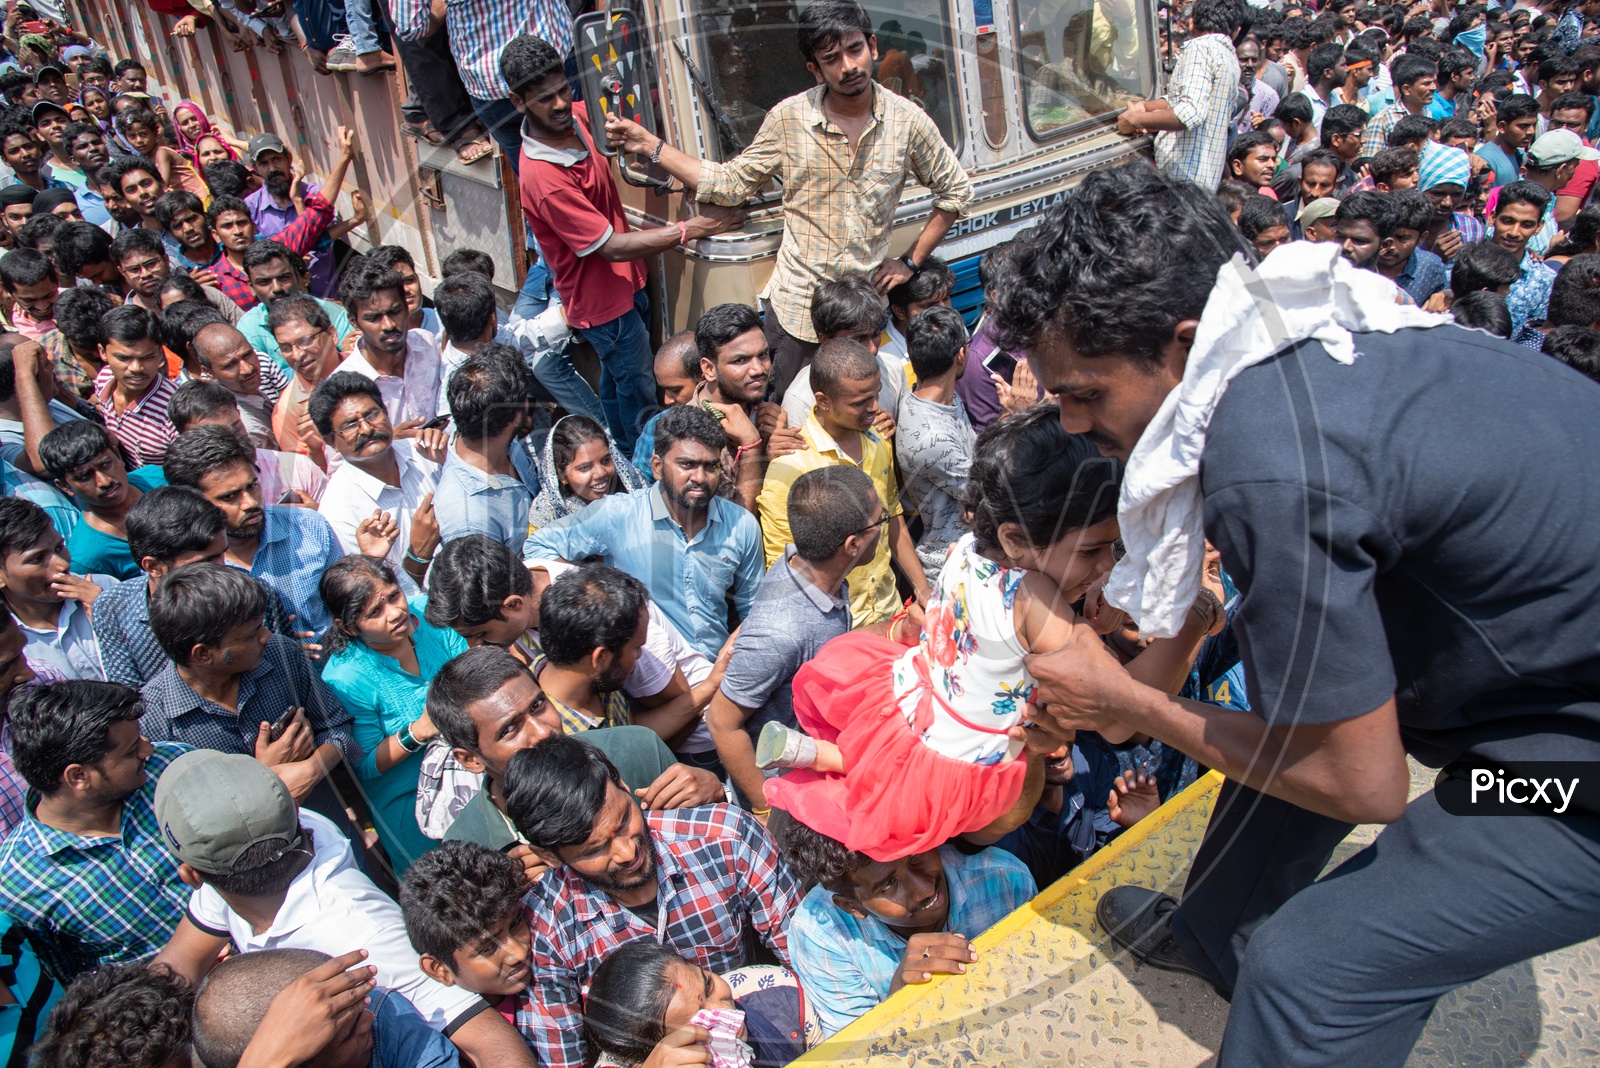 GHMC and Police help kids to sit at a safer place during the Khairatabad ganesh procession